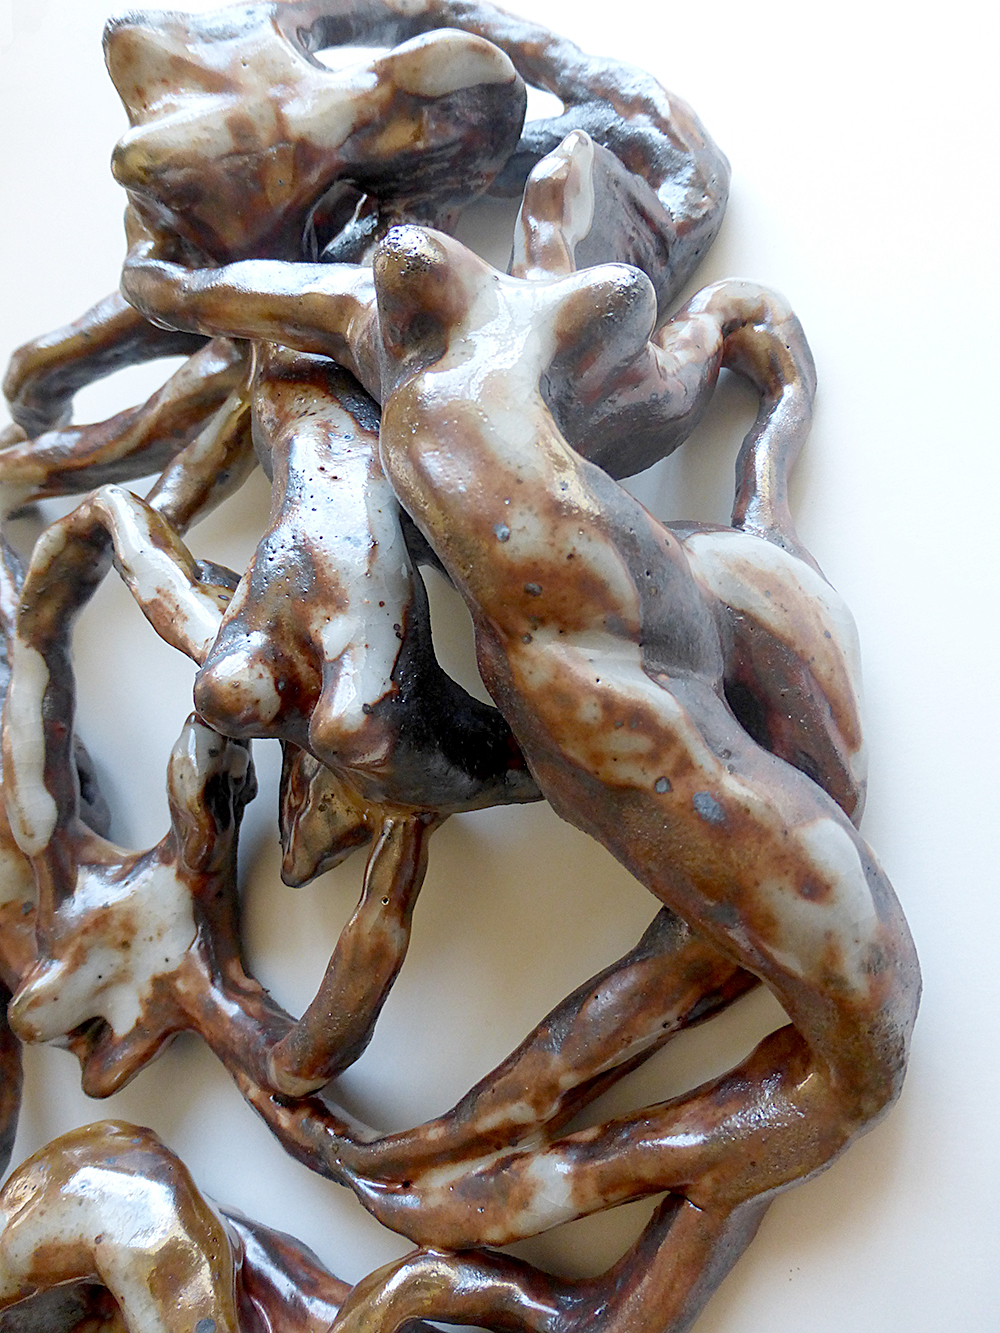 organic female erotic nude women earth sexuality creature mythology underwater Nature bodies sculpture glass ceramic